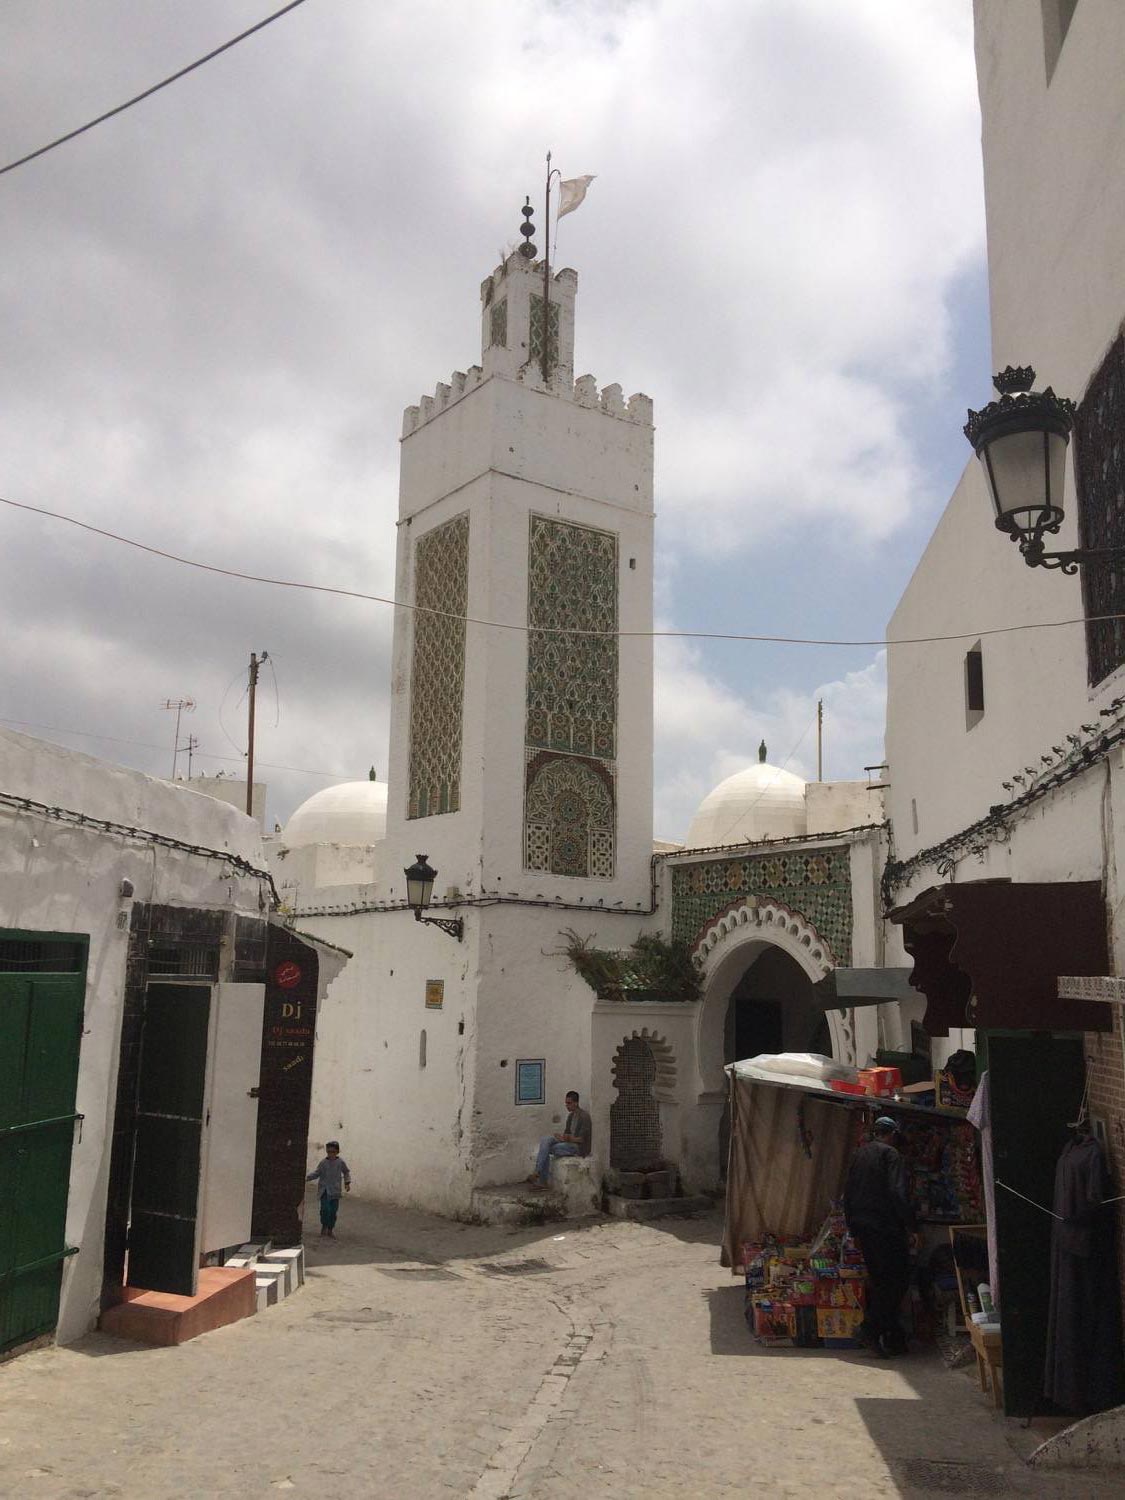 View of the portal and minaret